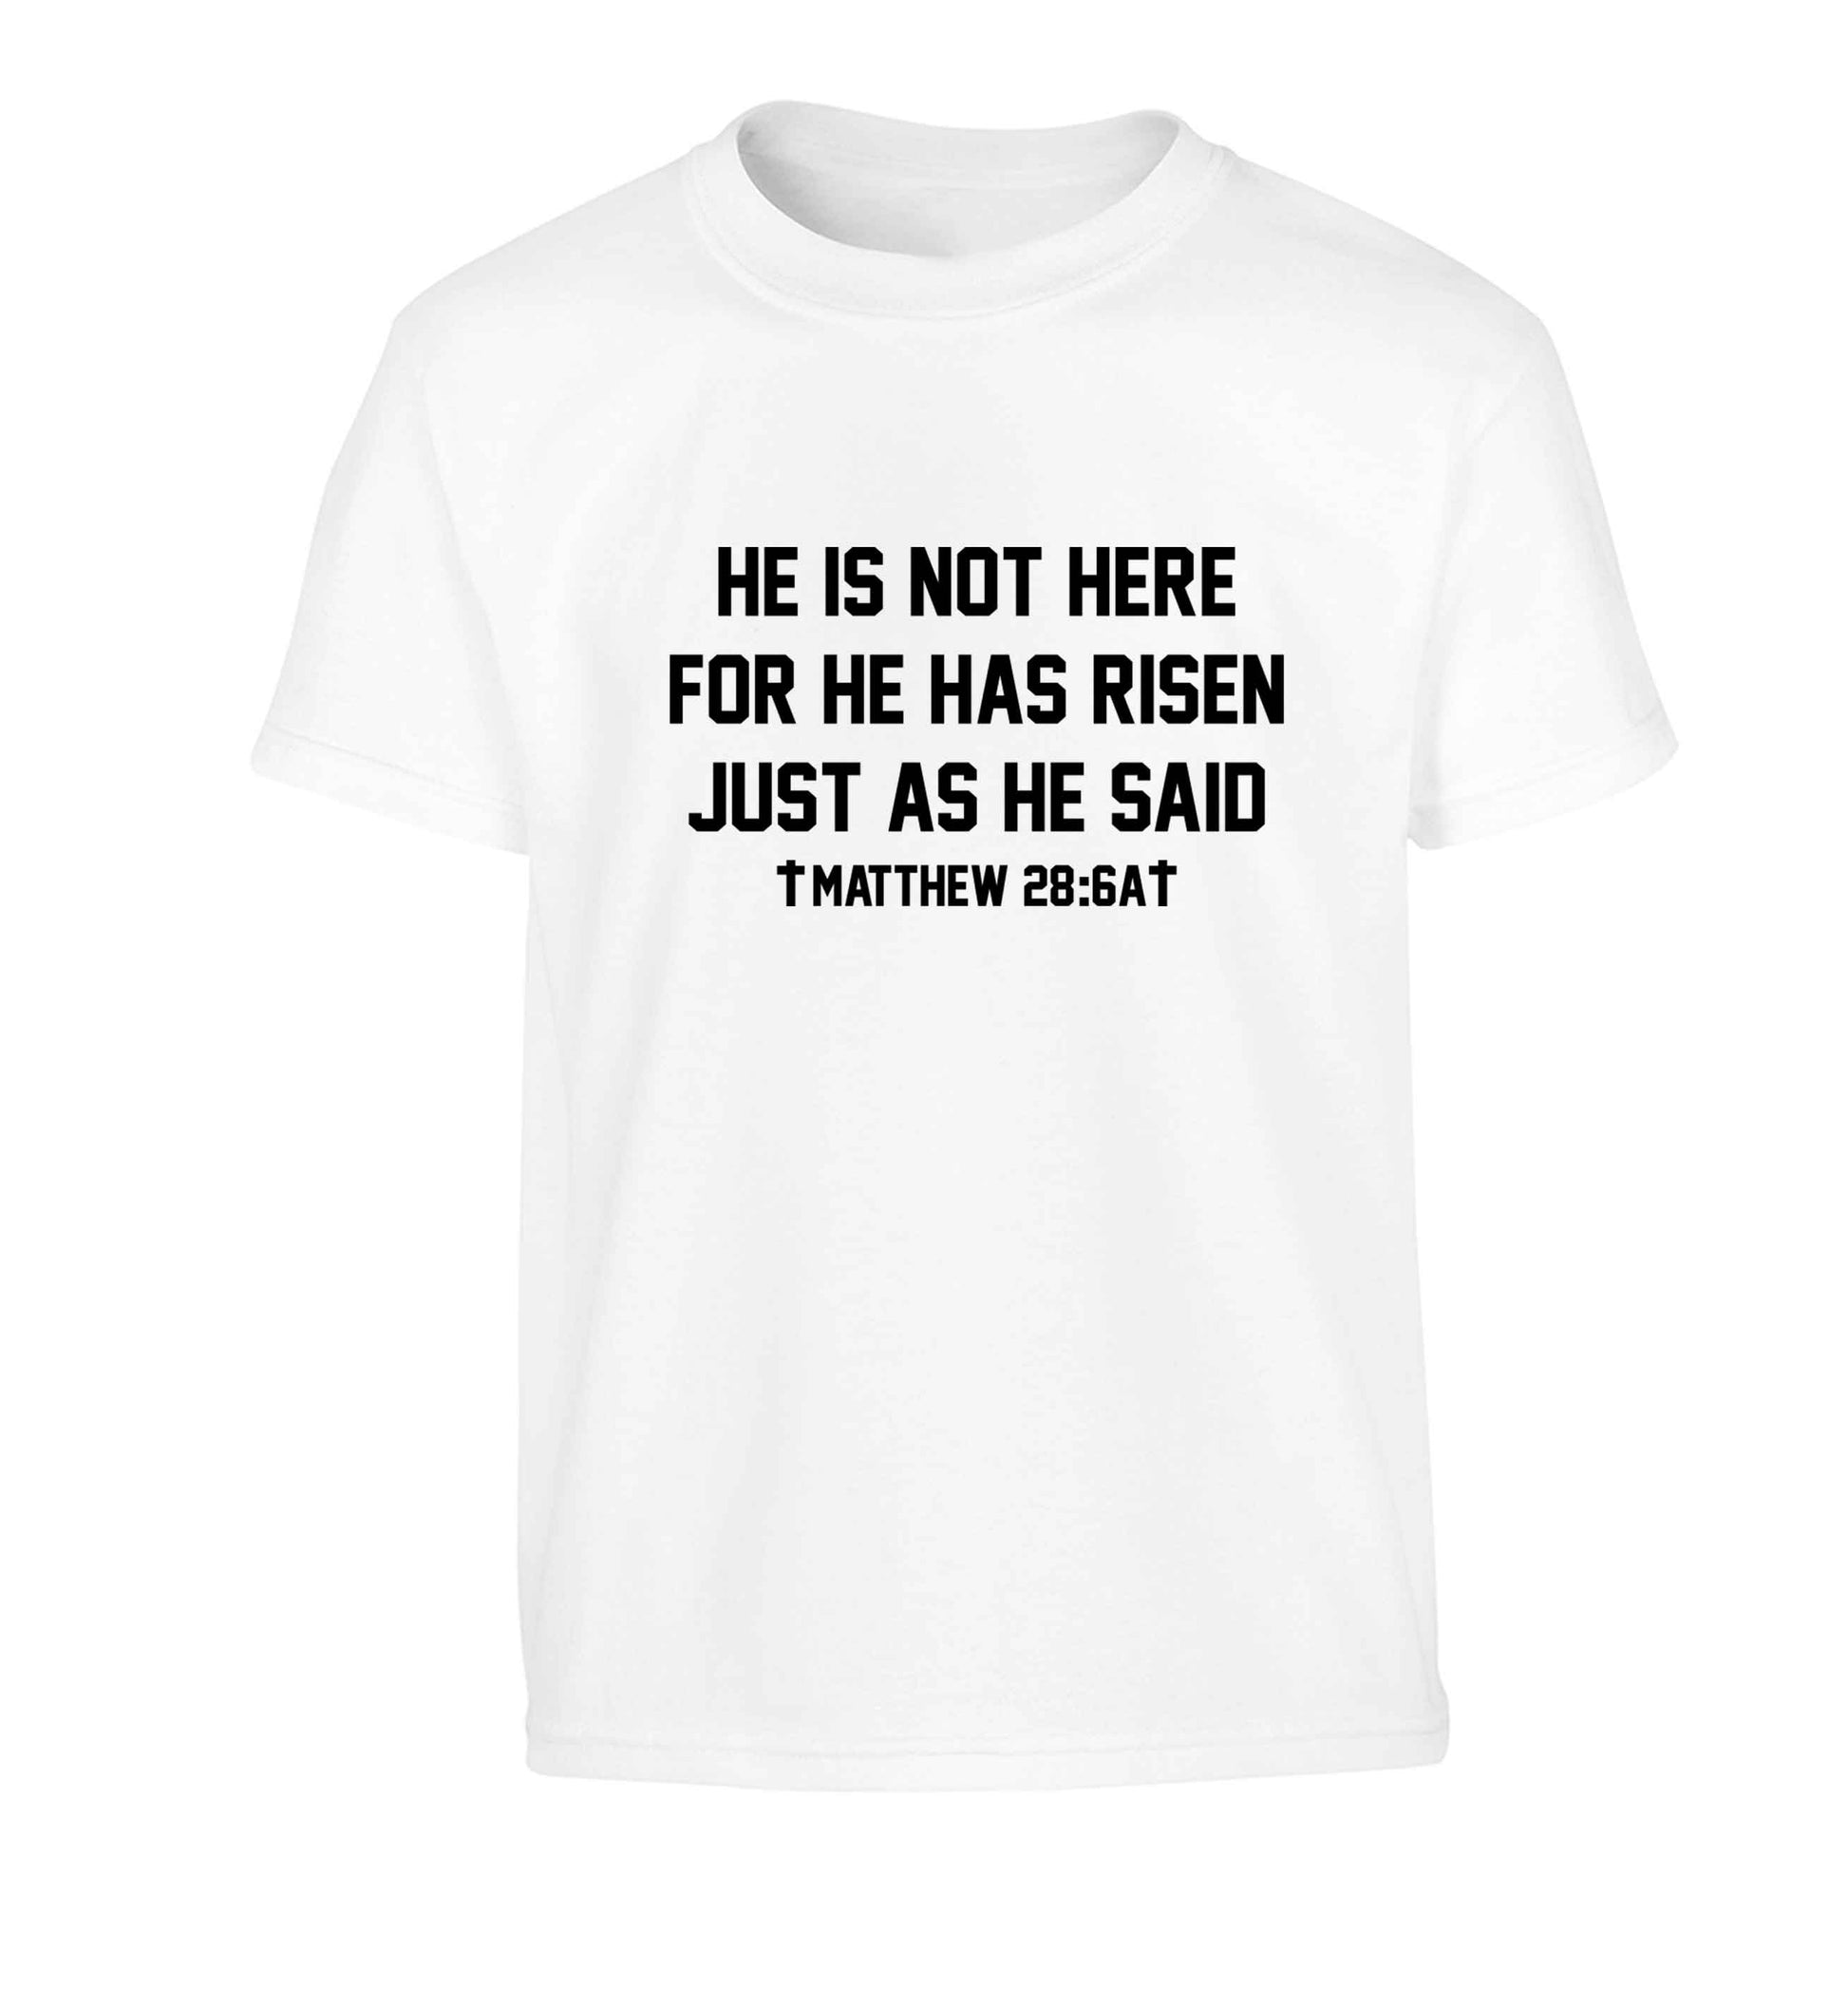 He is not here for he has risen just as he said matthew 28:6A Children's white Tshirt 12-13 Years